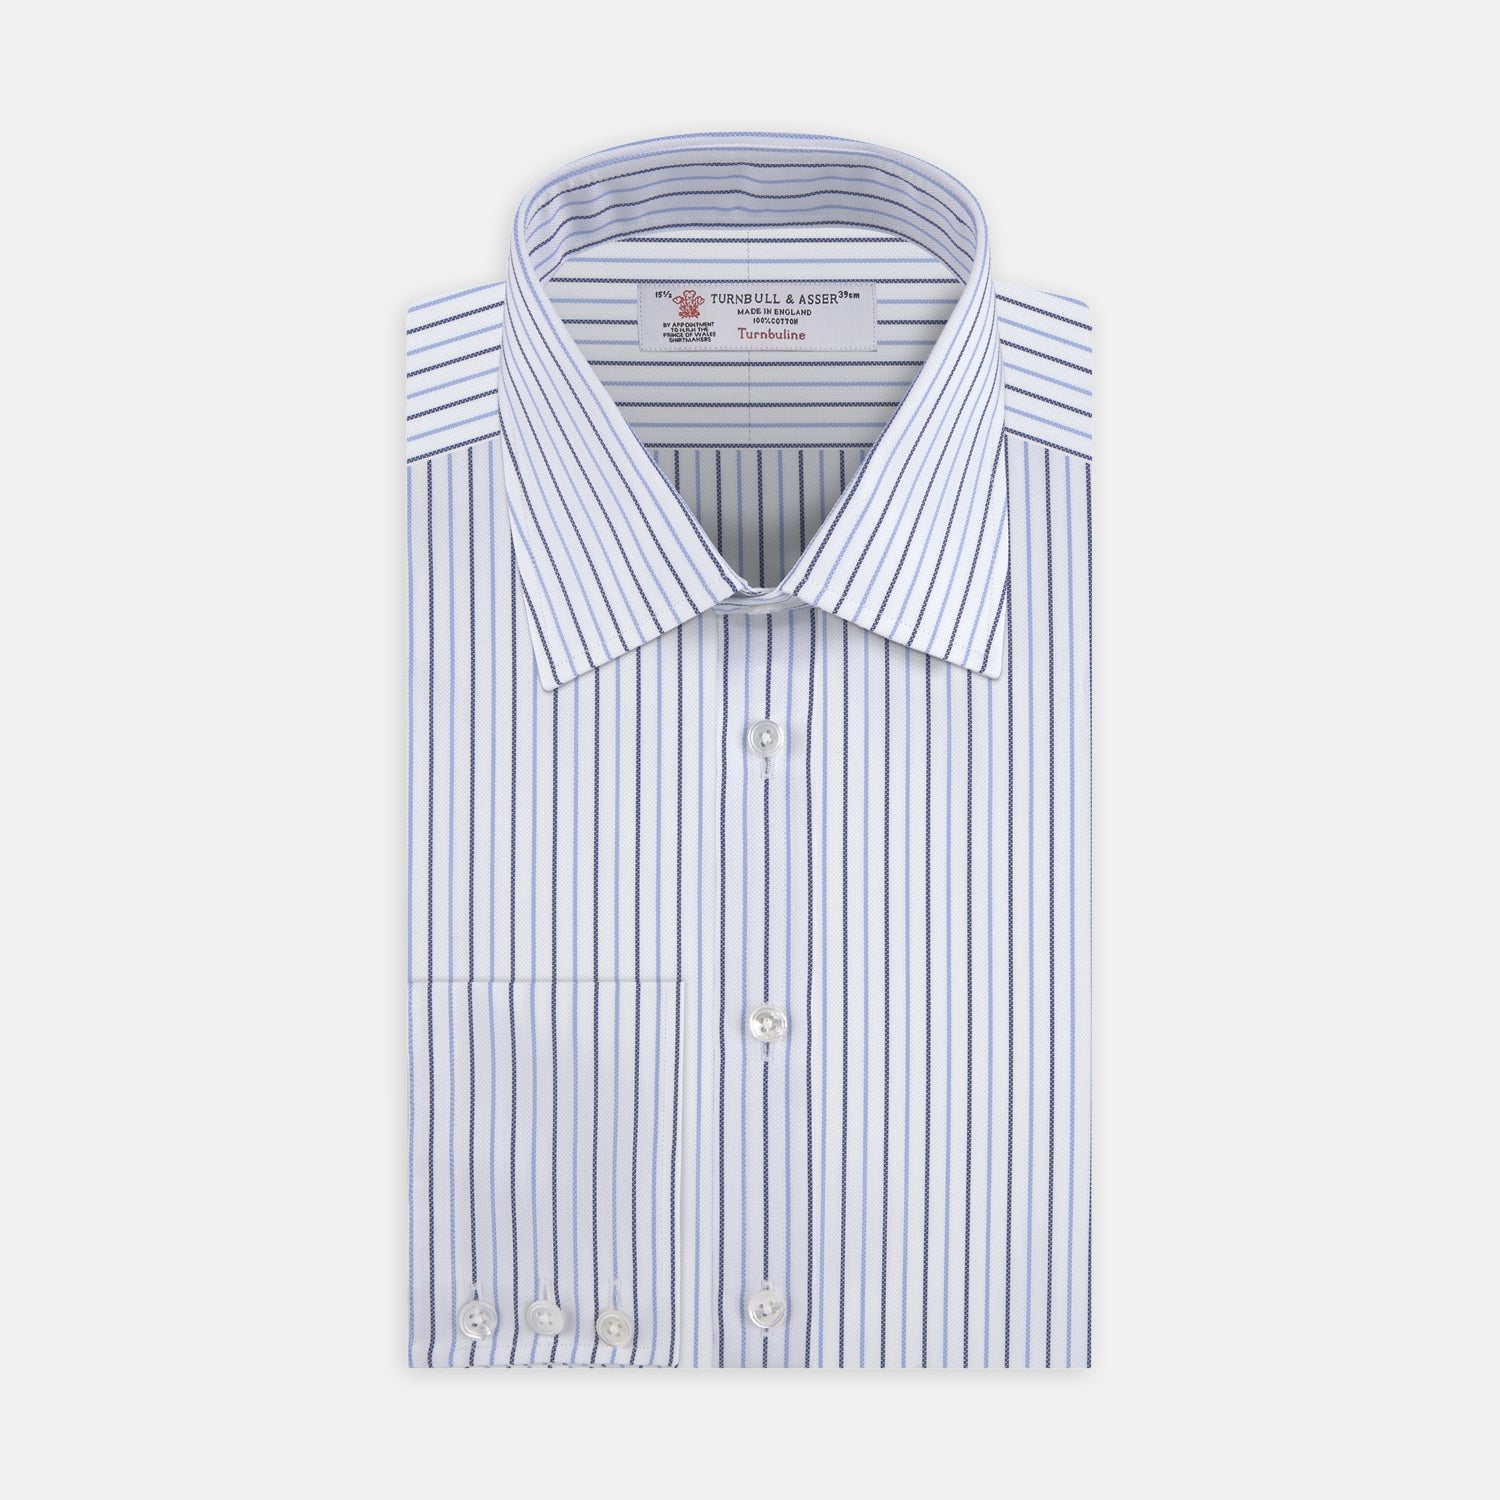 Grey And Blue Pinstripe Shirt With Classic T&A Collar And Button Cuffs